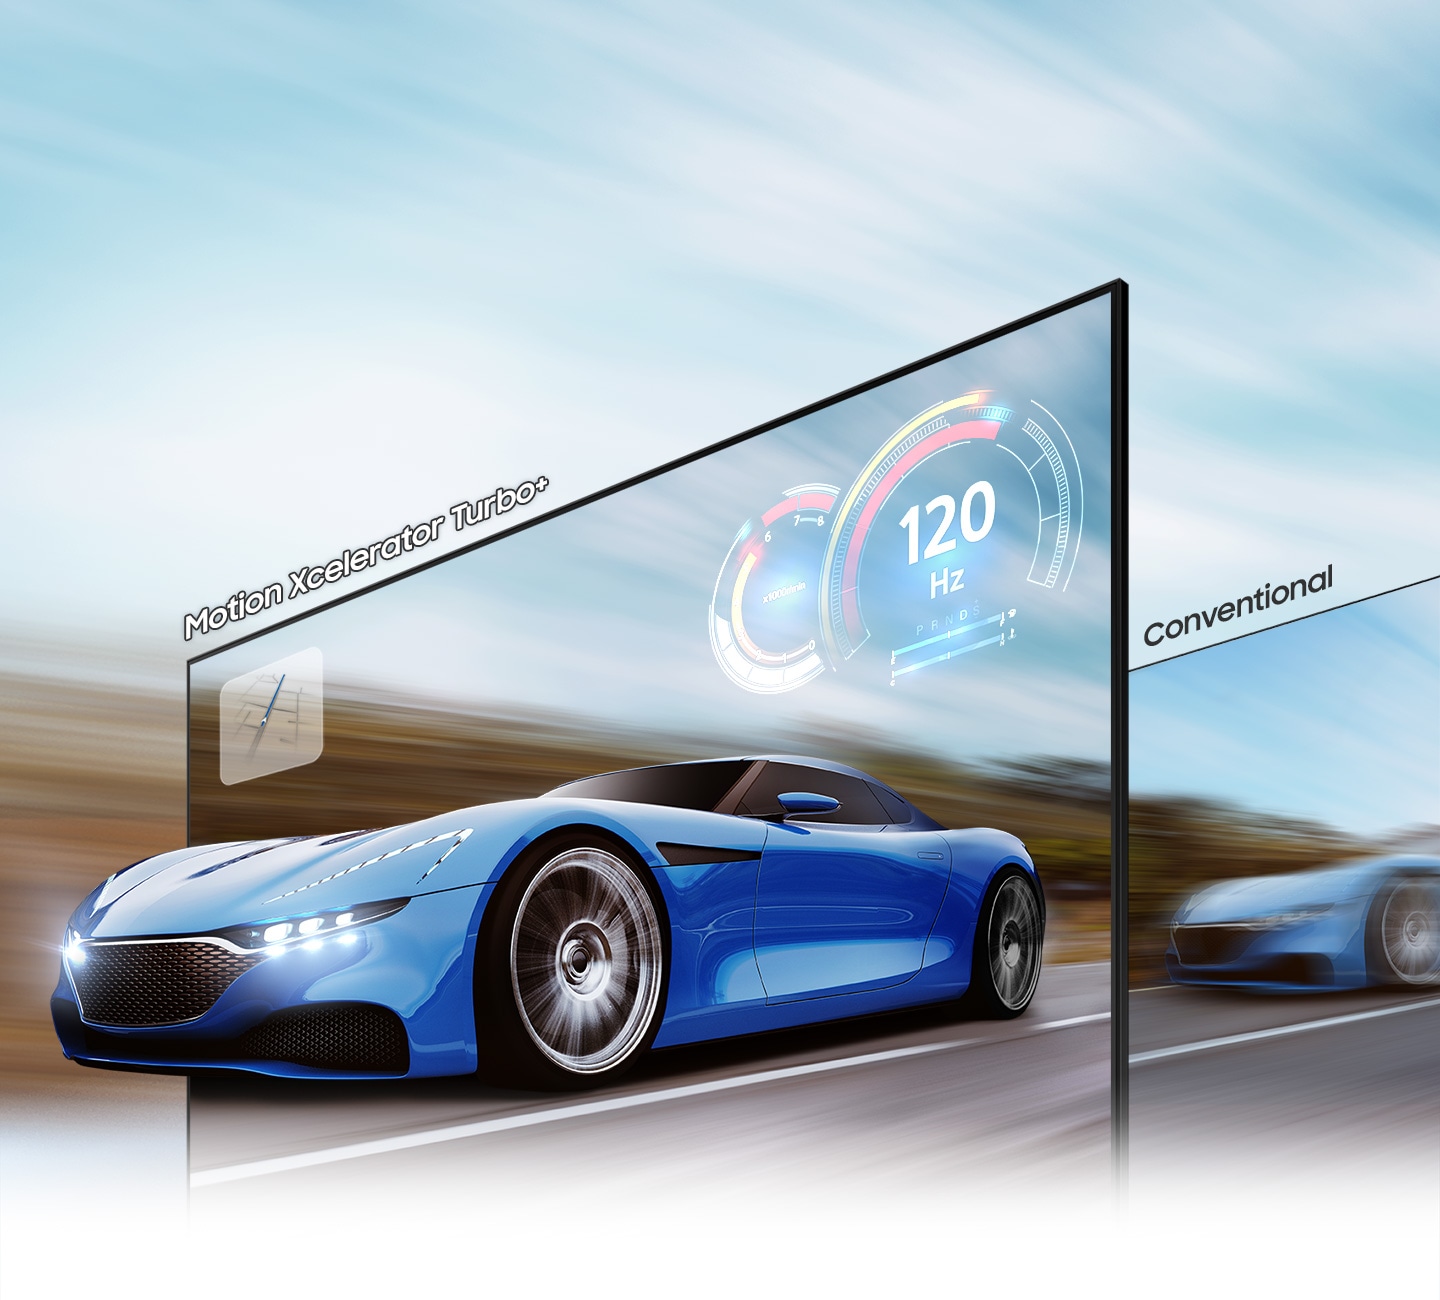 A racing car on the TV screen looks clearer and more visible on the QLED TV than on conventional TV due to motion xcelerator turbo+ technology up to 4K 120Hz.